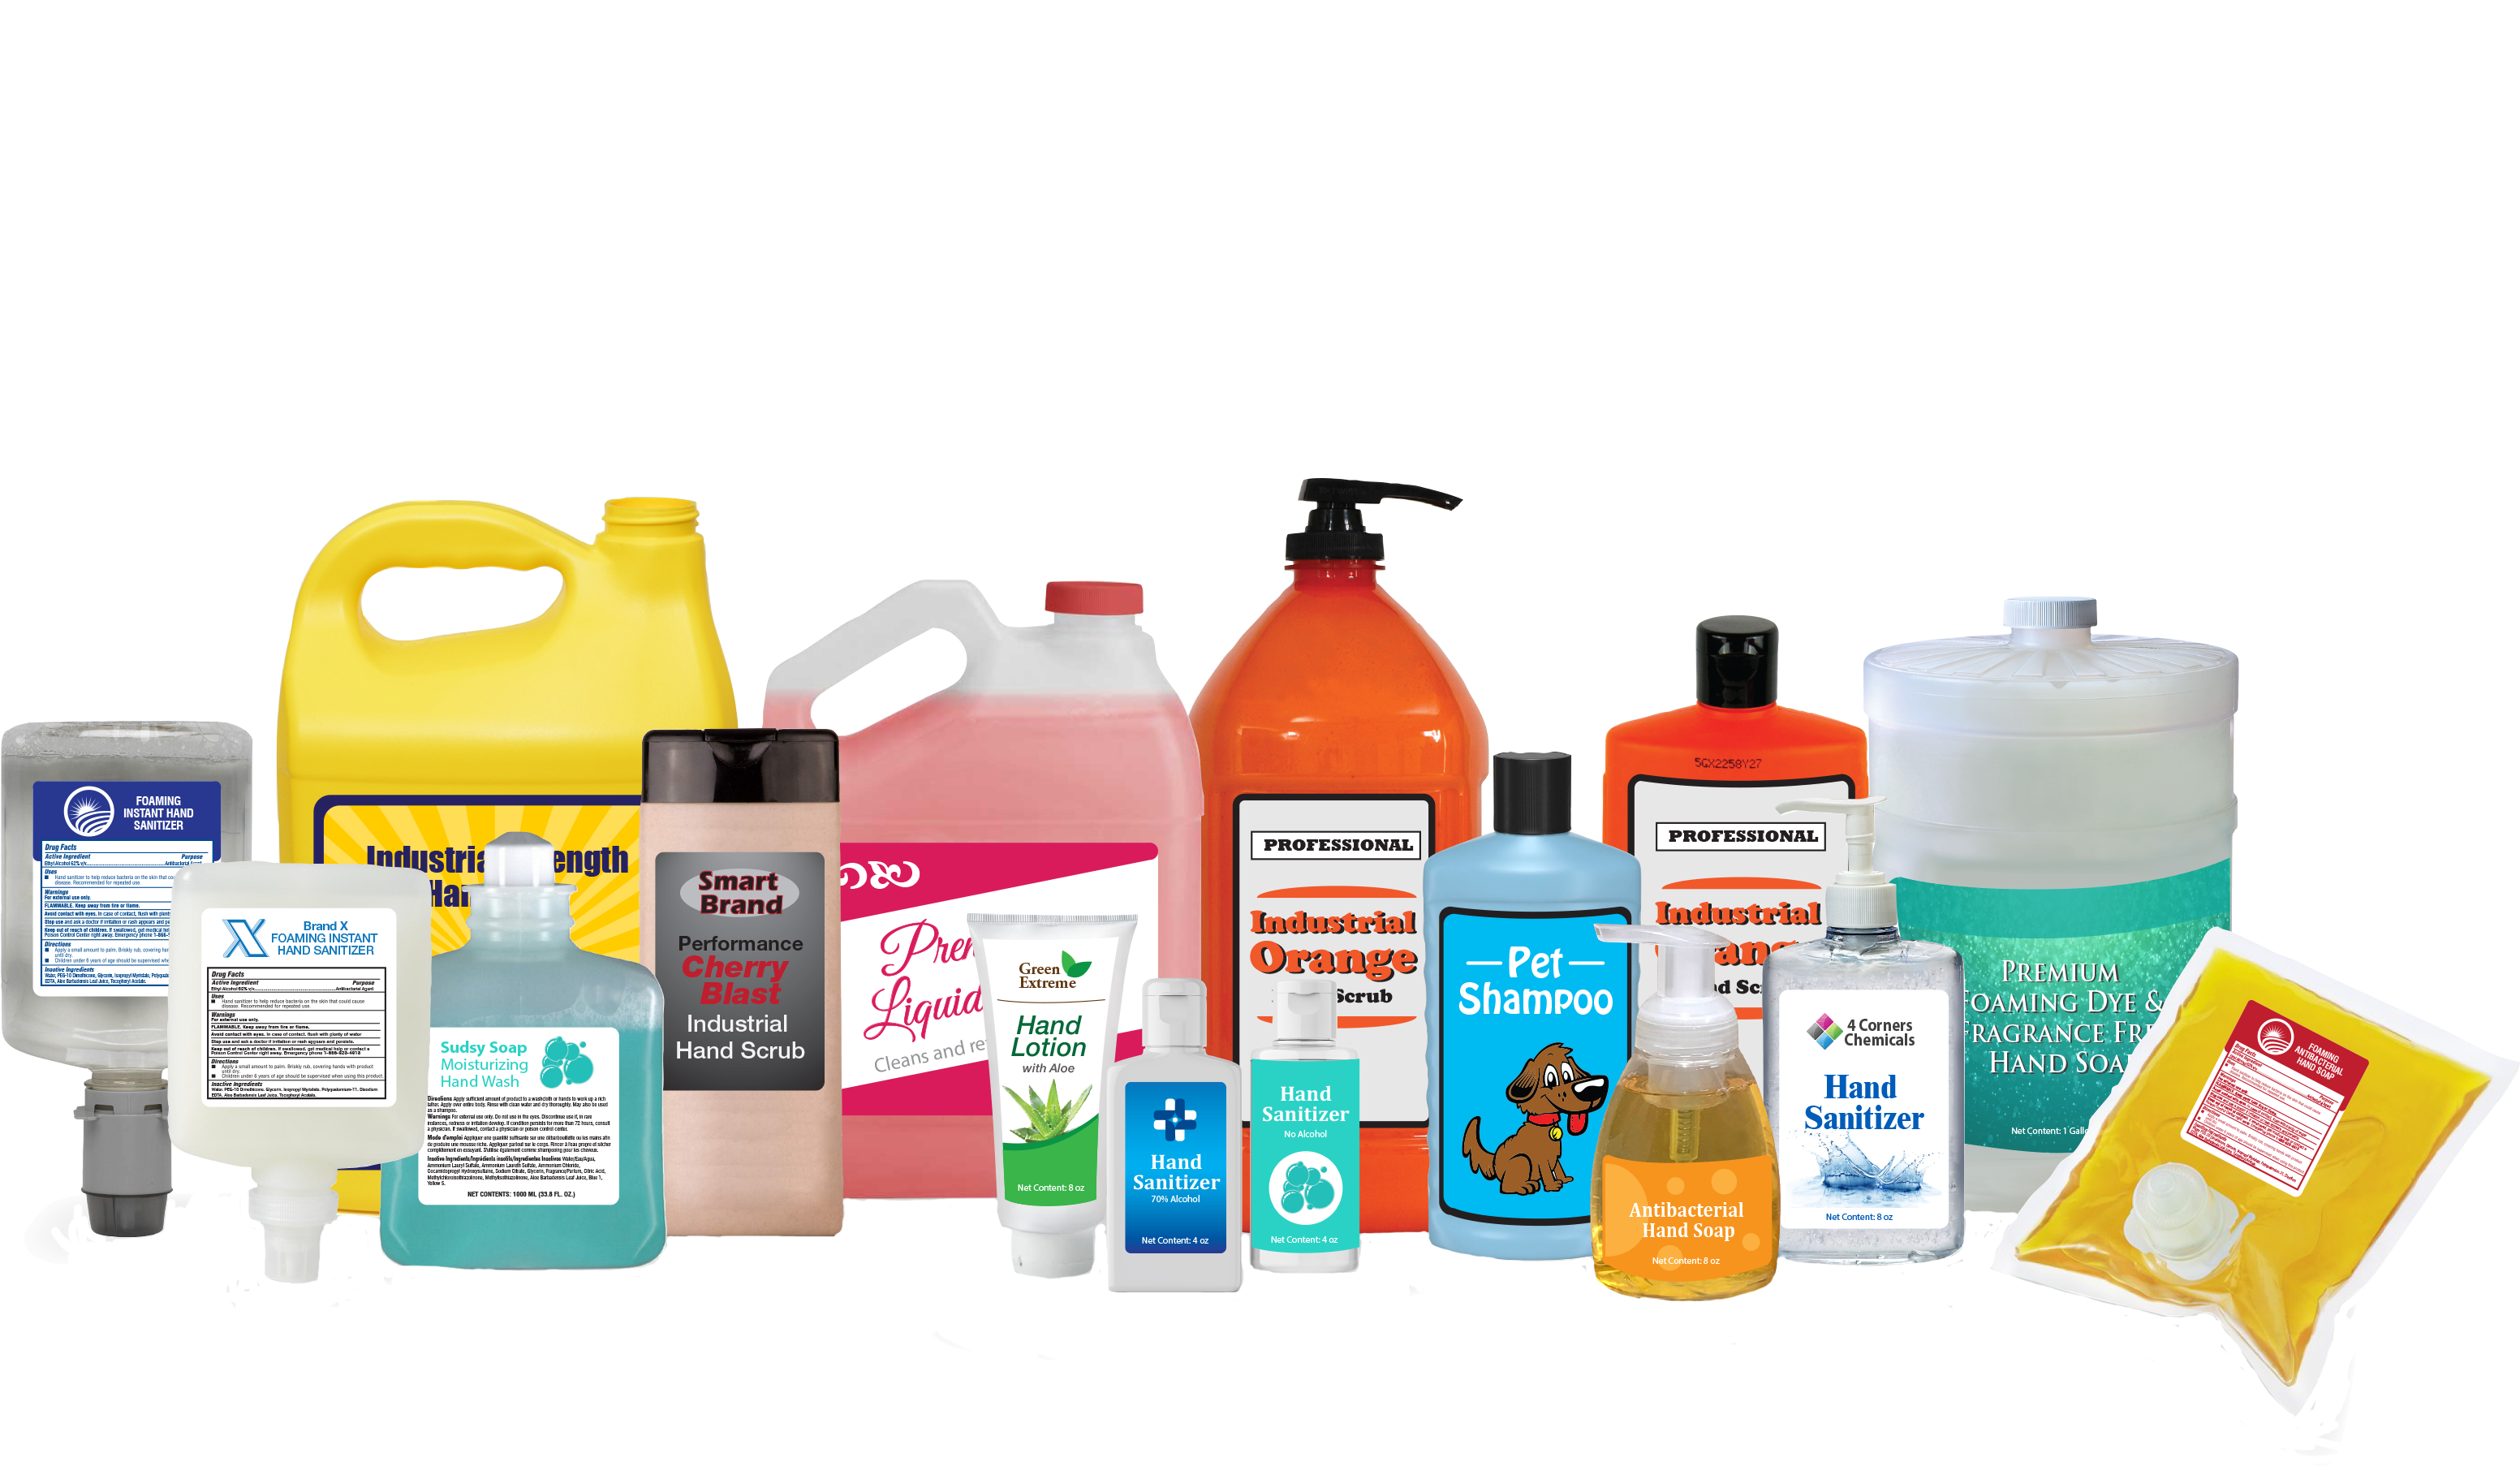 Skin Care Products: Hand Soaps, Sanitizers & Dispensers